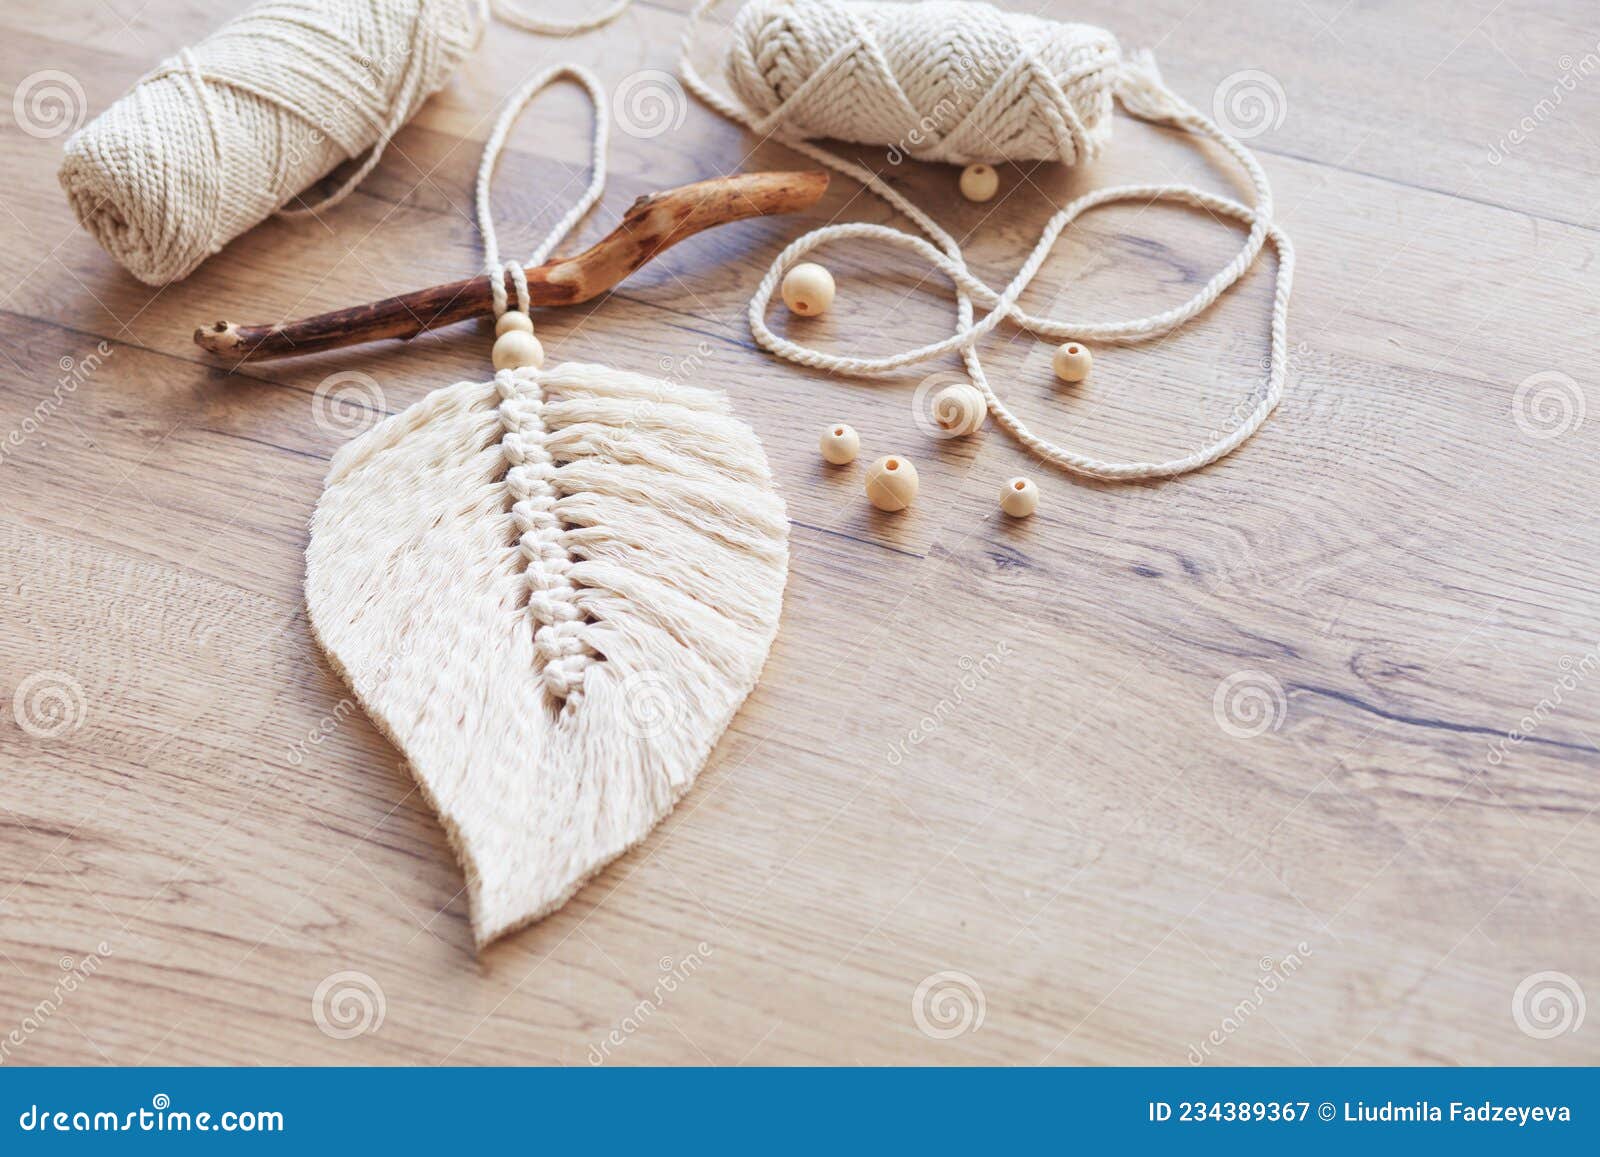 https://thumbs.dreamstime.com/z/macrame-leaf-natural-color-thread-windings-lying-wooden-table-cotton-rope-decor-macrame-to-make-your-room-more-cozy-234389367.jpg